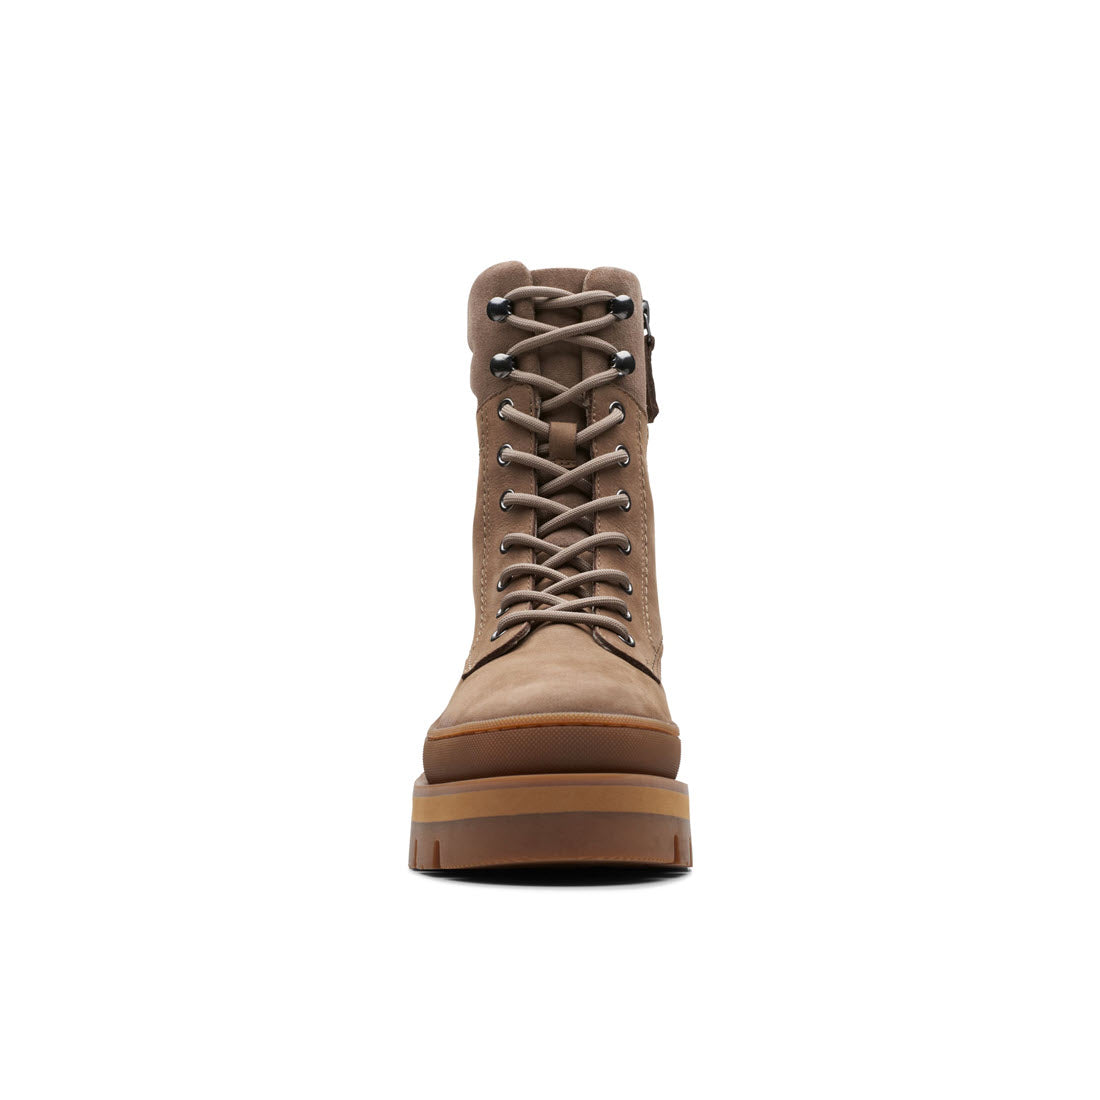 Front view of a brown Clarks Orianna 2 Hike Pebble lace-up combat boot isolated on a white background.